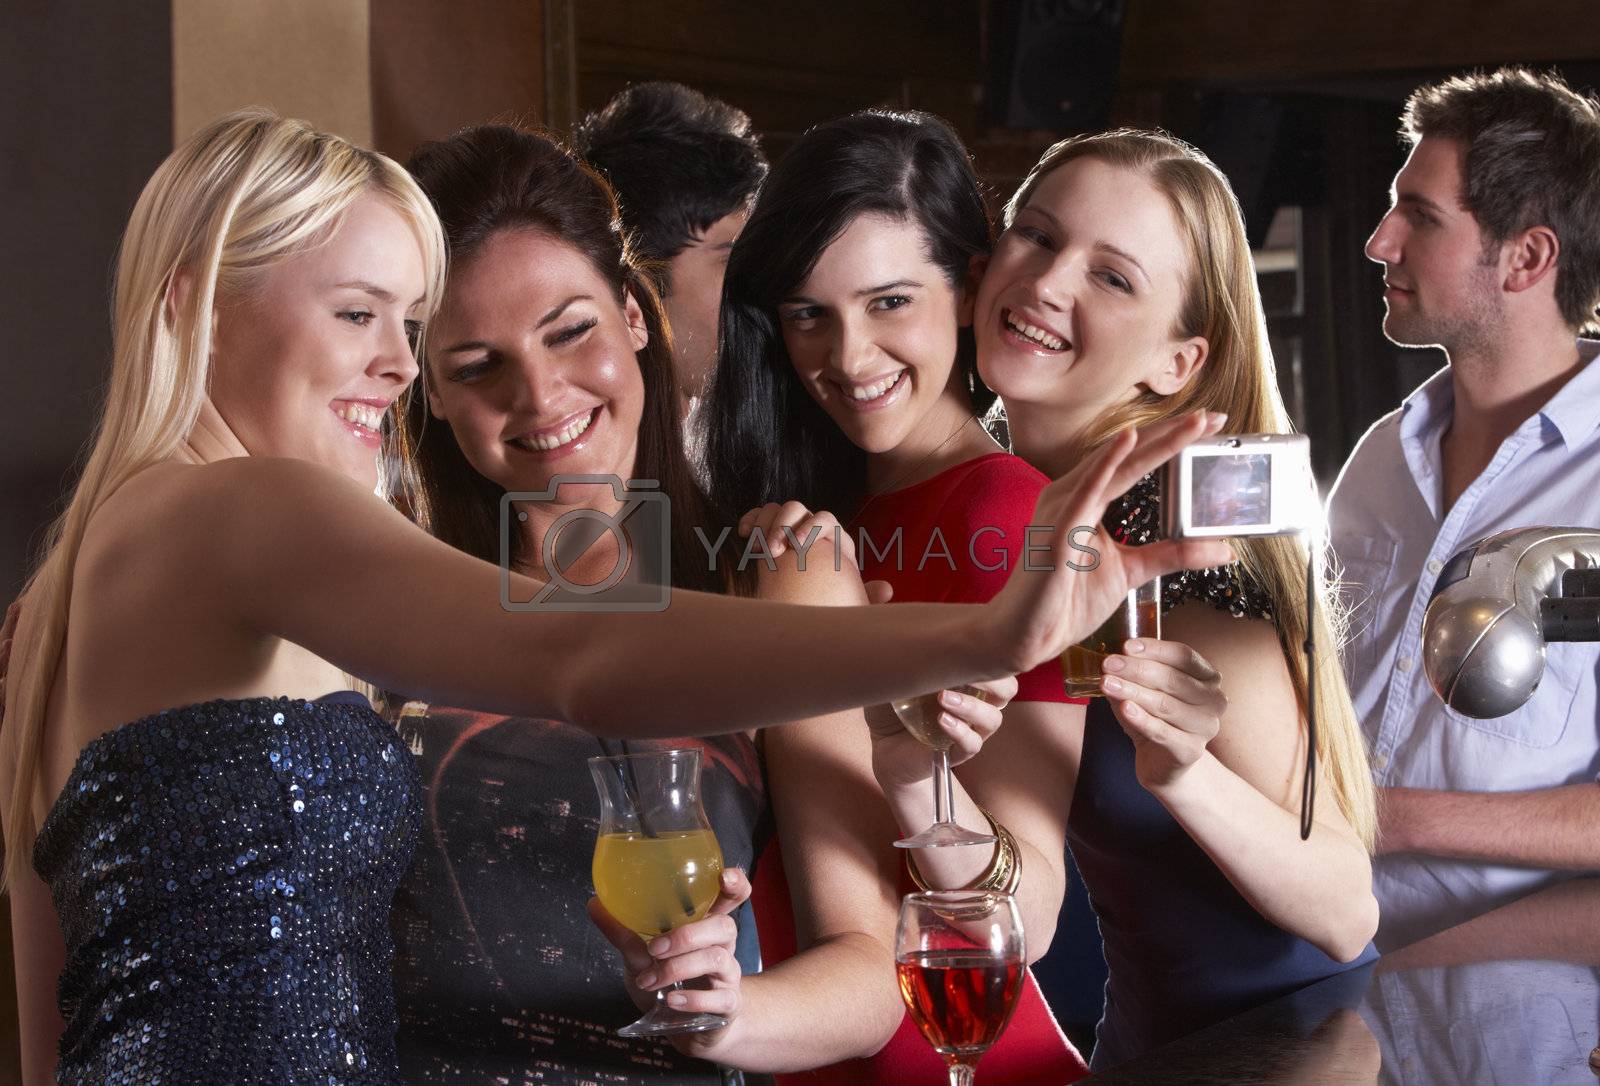 Royalty free image of Young women drinking at bar by omg_images